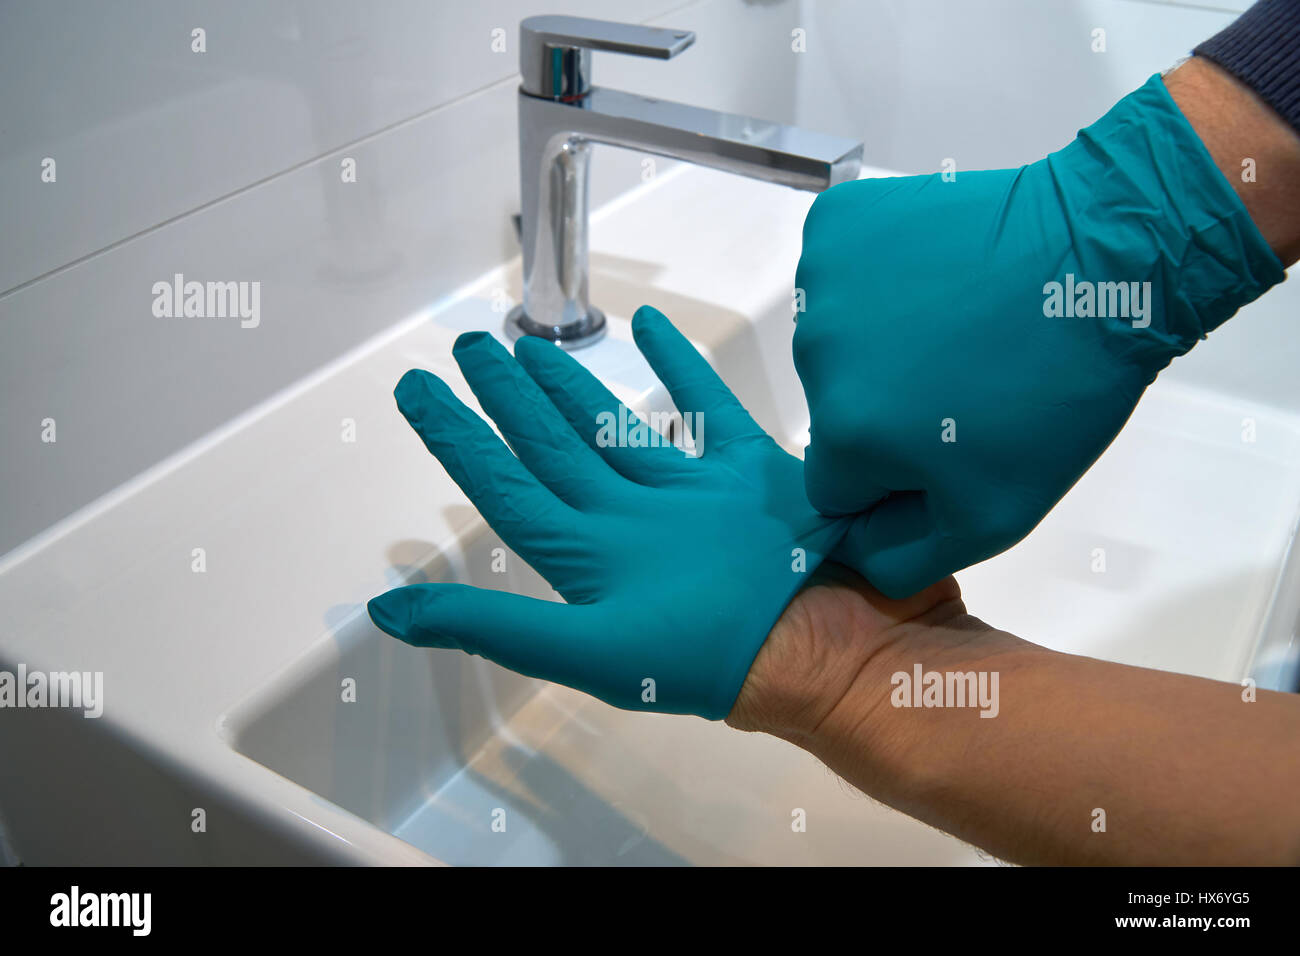 putting on medical gloves, close up Stock Photo